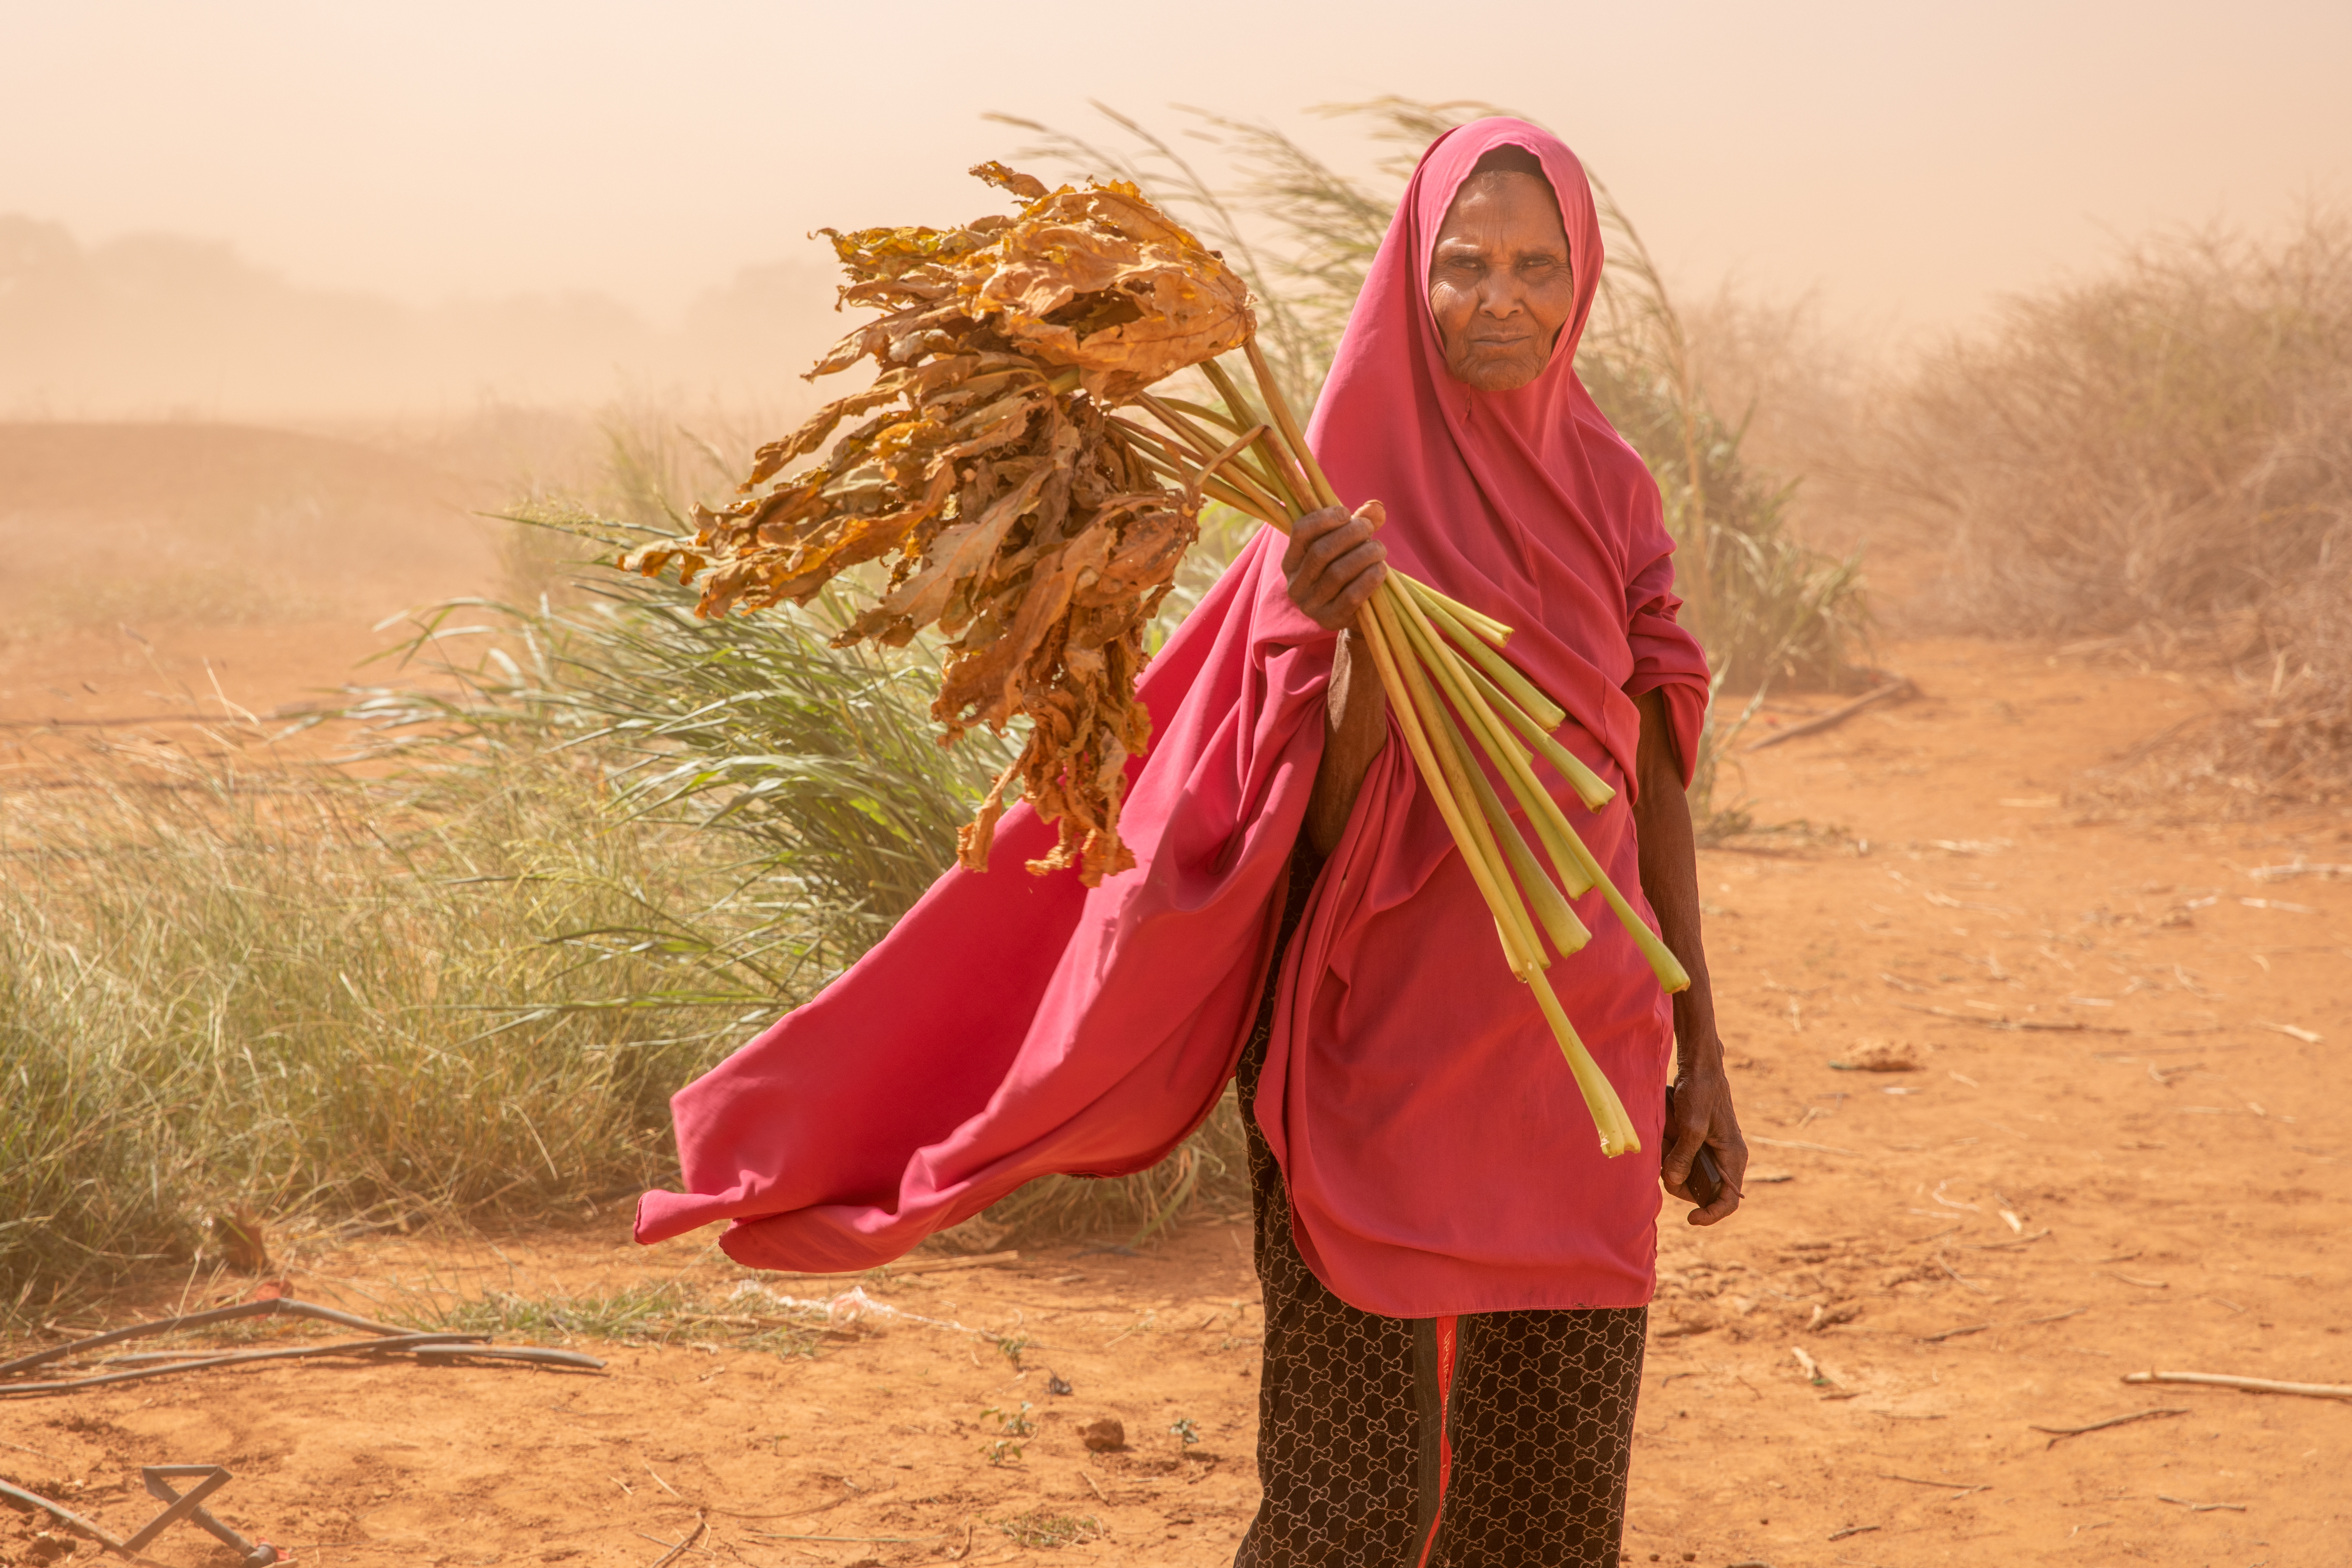 In wajir, kenya, amina abdi holds withered animal feed while heavy winds blow sand through her village. 